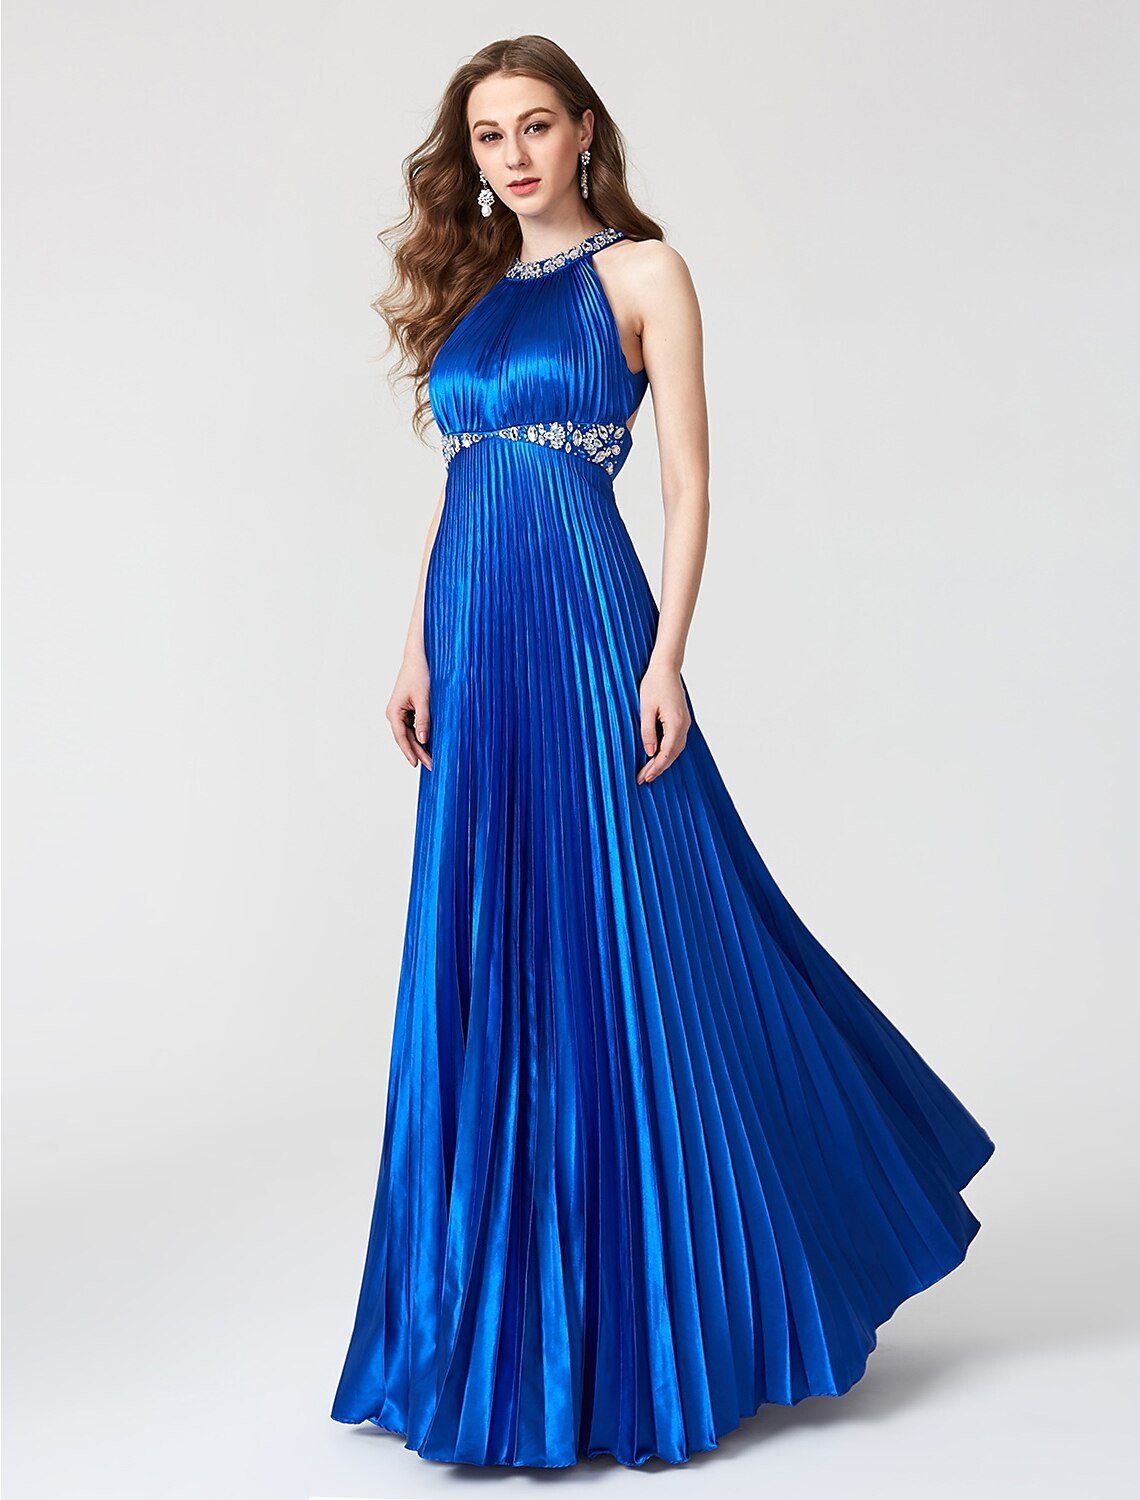 A-Line Beautiful Back Dress Holiday Cocktail Party Floor Length Sleeveless Jewel Neck Satin with Pleats Beading